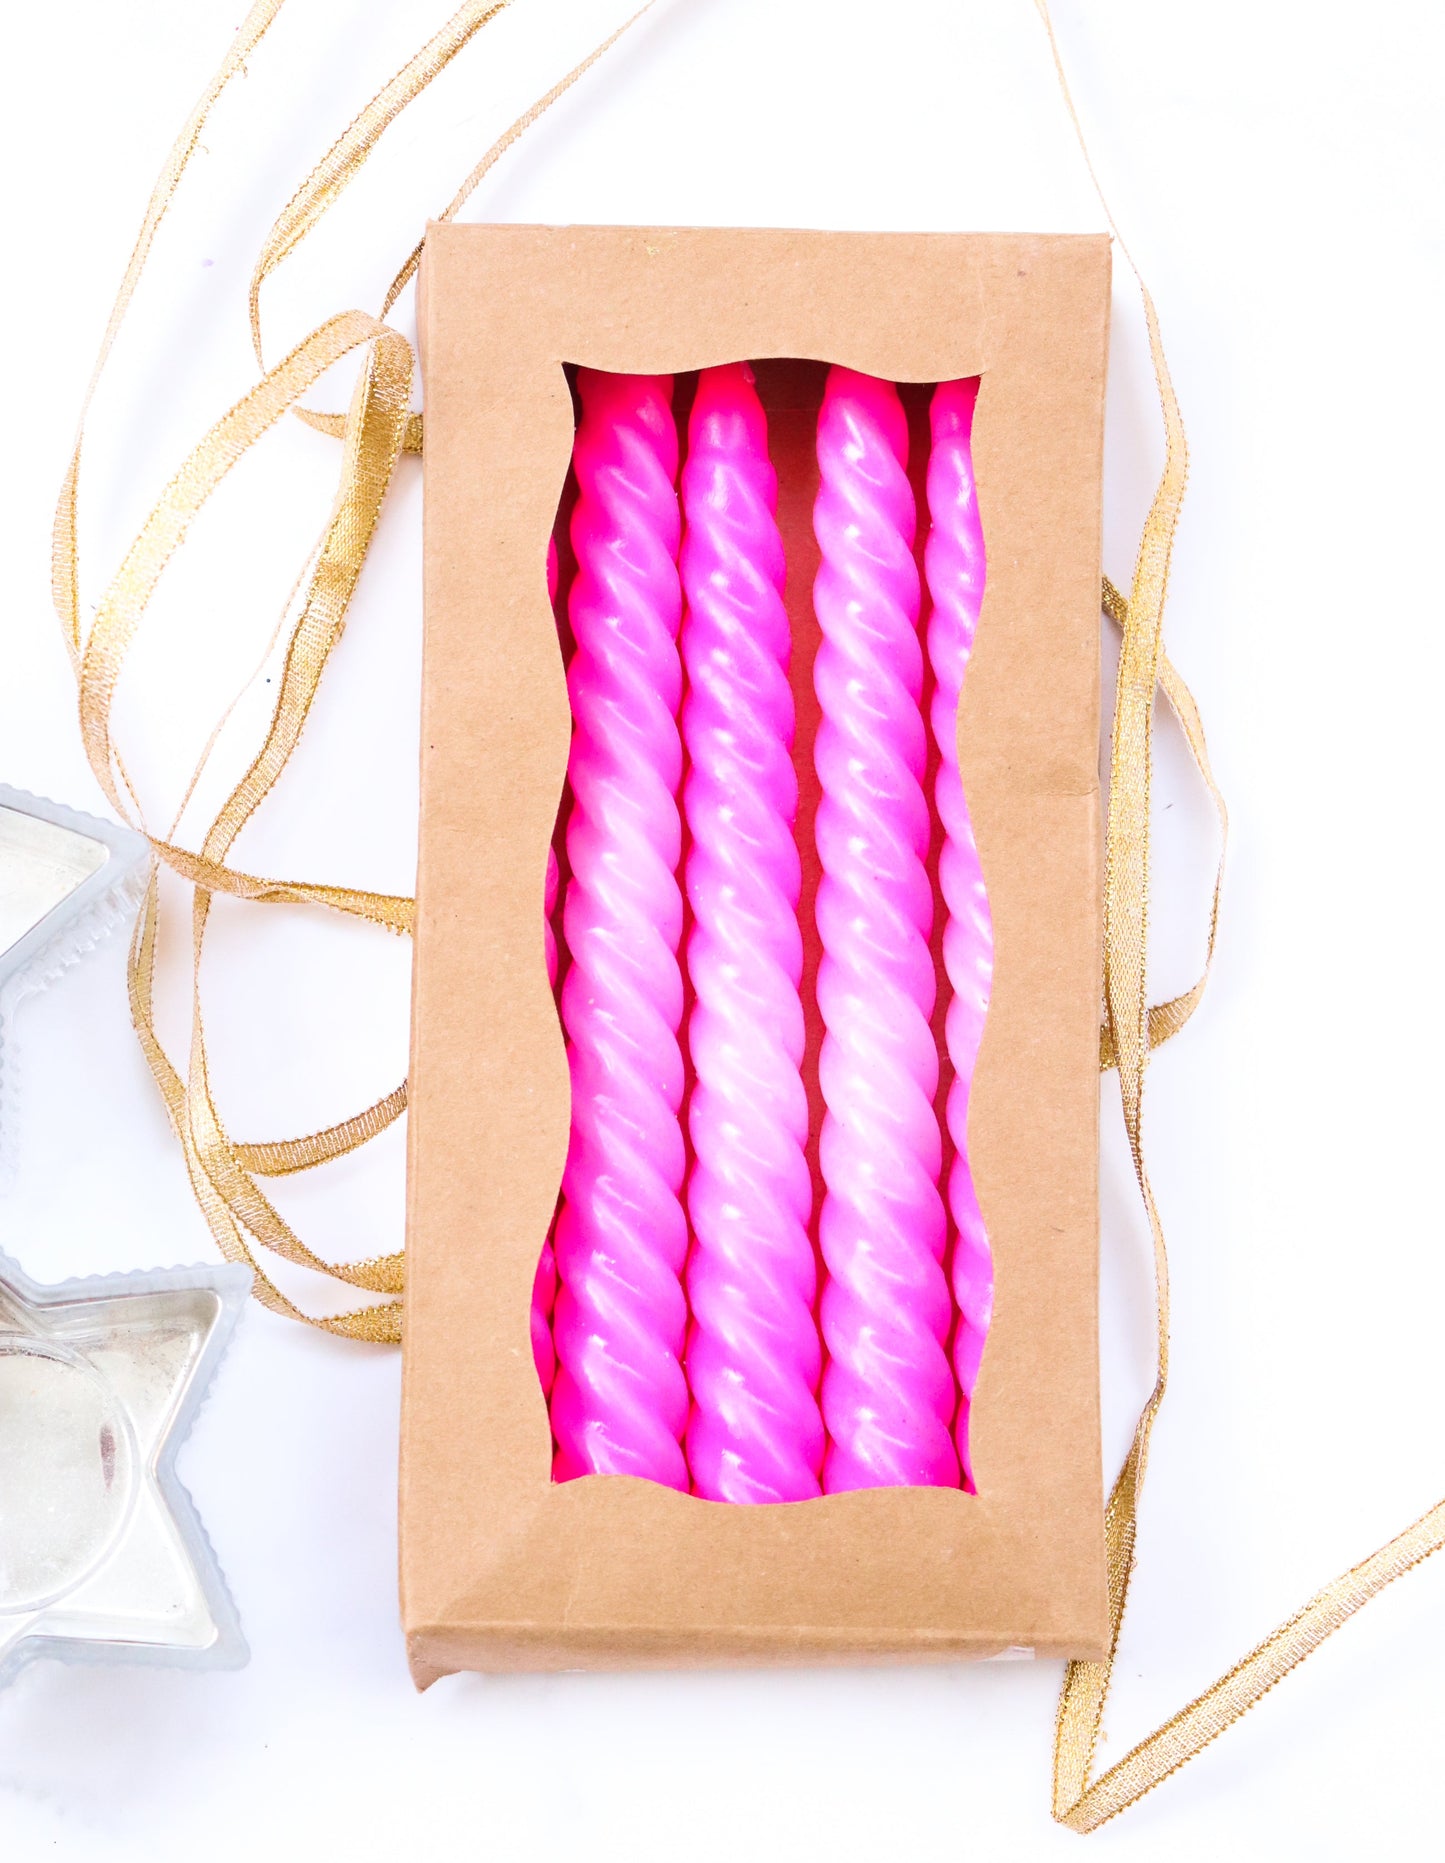 Pink tapered candles - Twisted Candles - Dip dyed candles